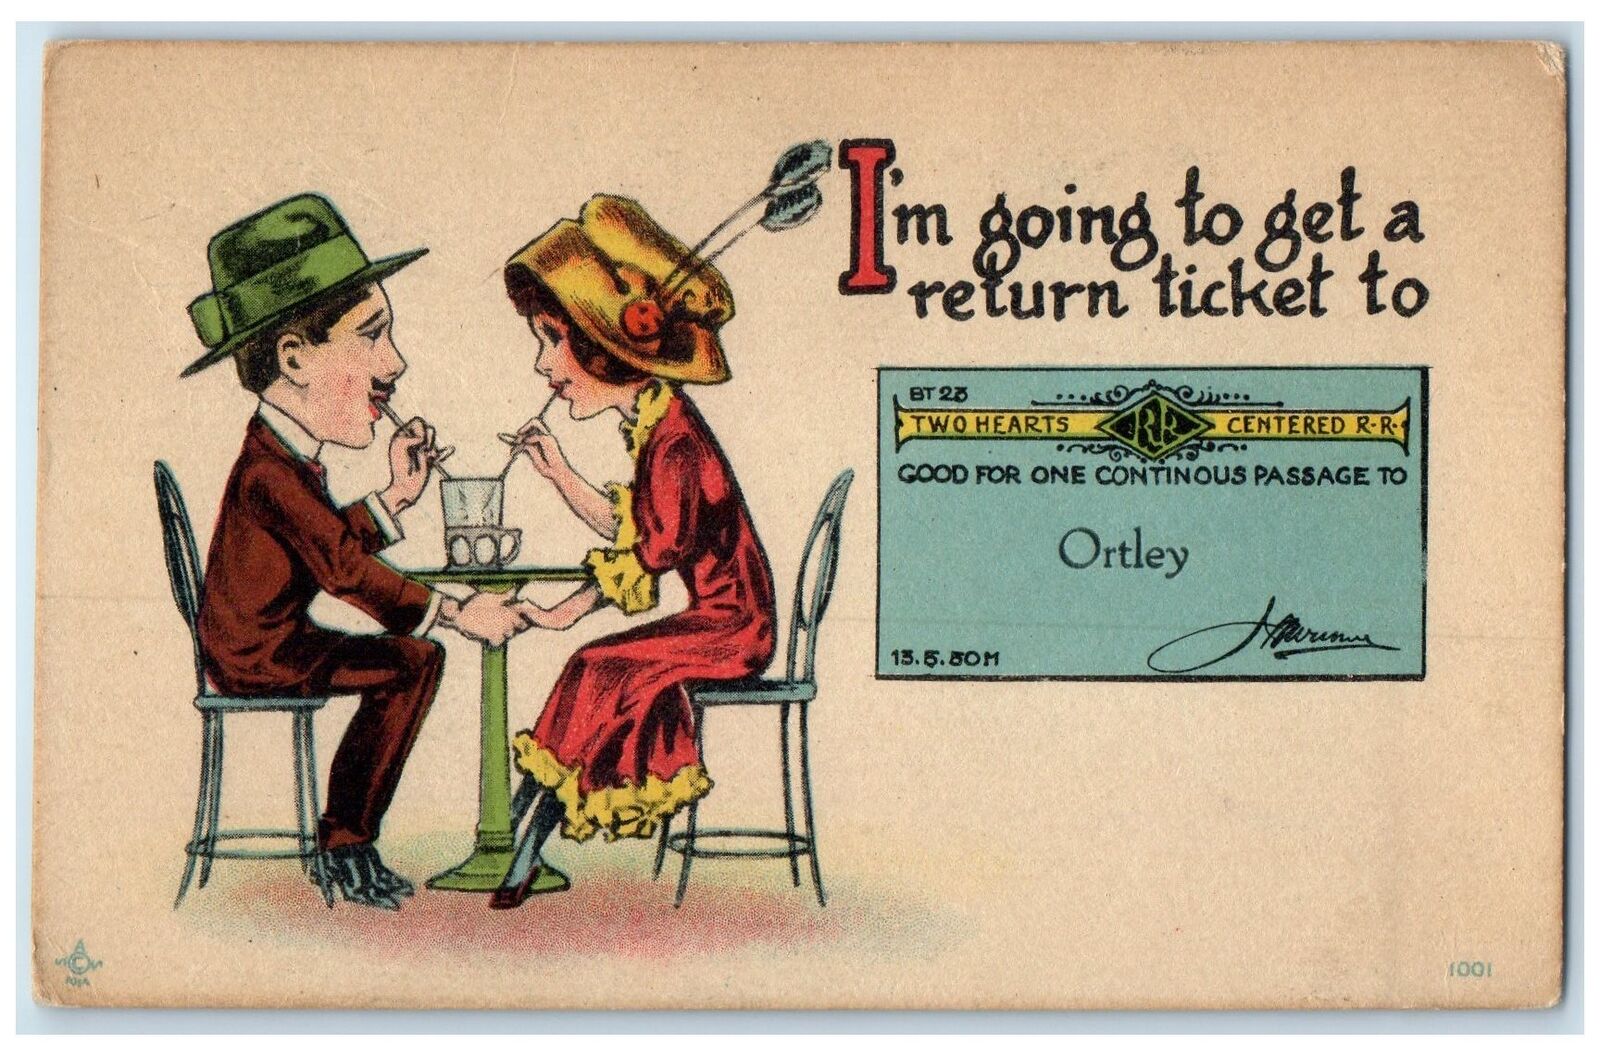 1916 Im Going To Ticket To Get A Return Ticket To Ortley South Dakota Postcard